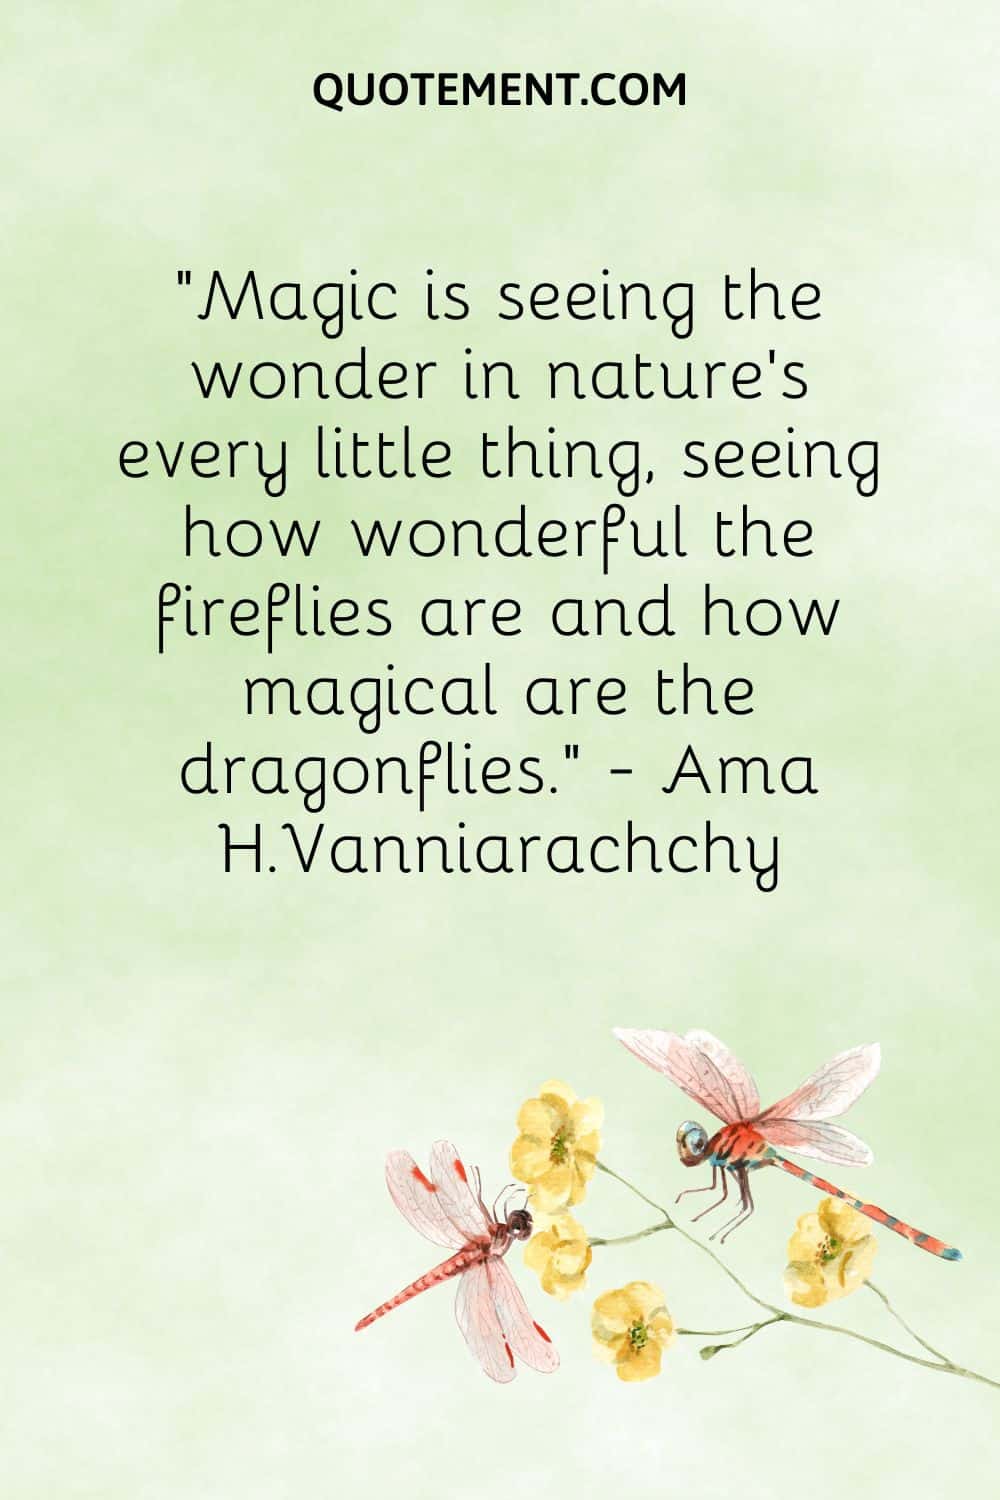 Magic is seeing the wonder in nature’s every little thing, seeing how wonderful the fireflies are and how magical are the dragonflies